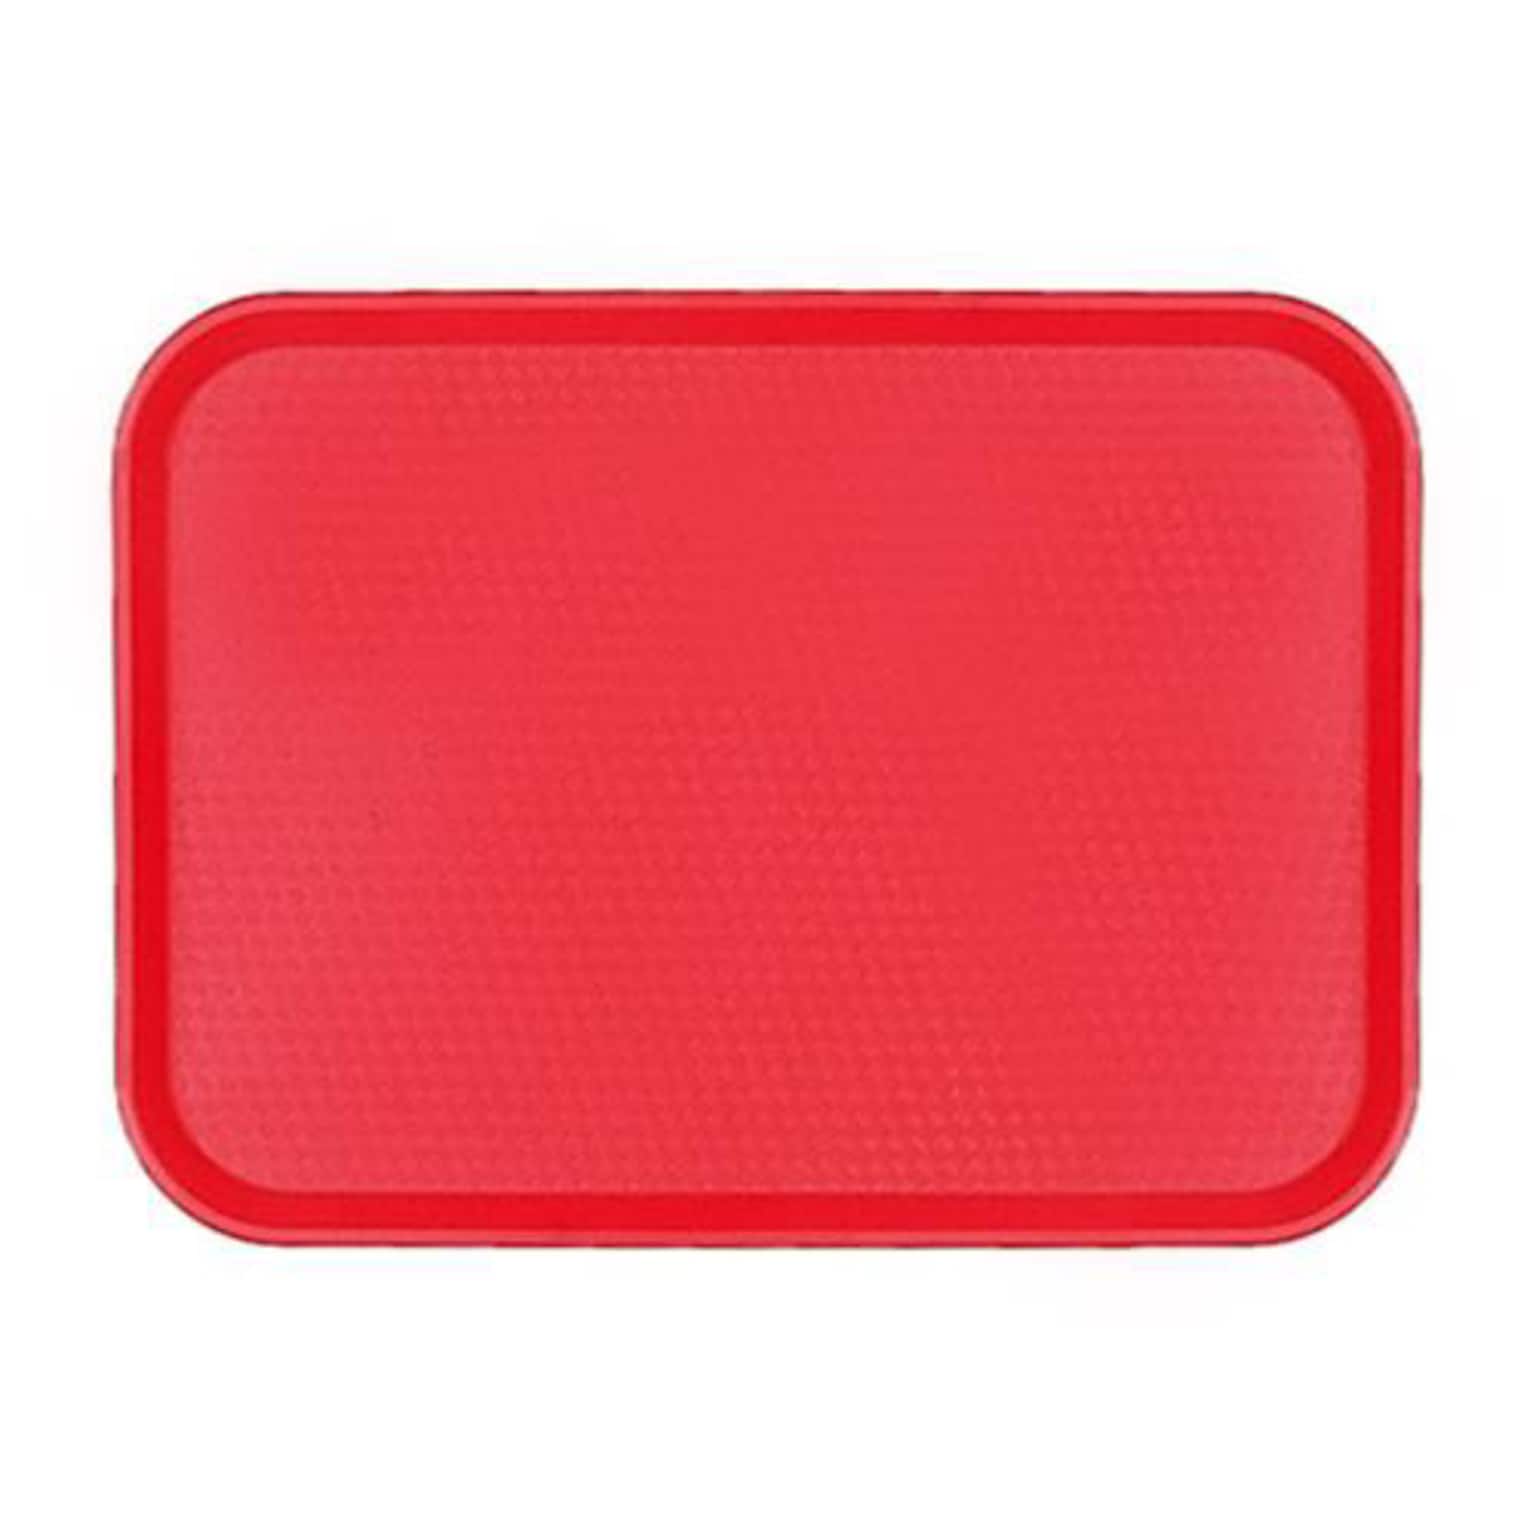 Cambro 10 X 14 Red Fast Food Tray, 13 9/16 L x 10 7/16 W, Red (75287)